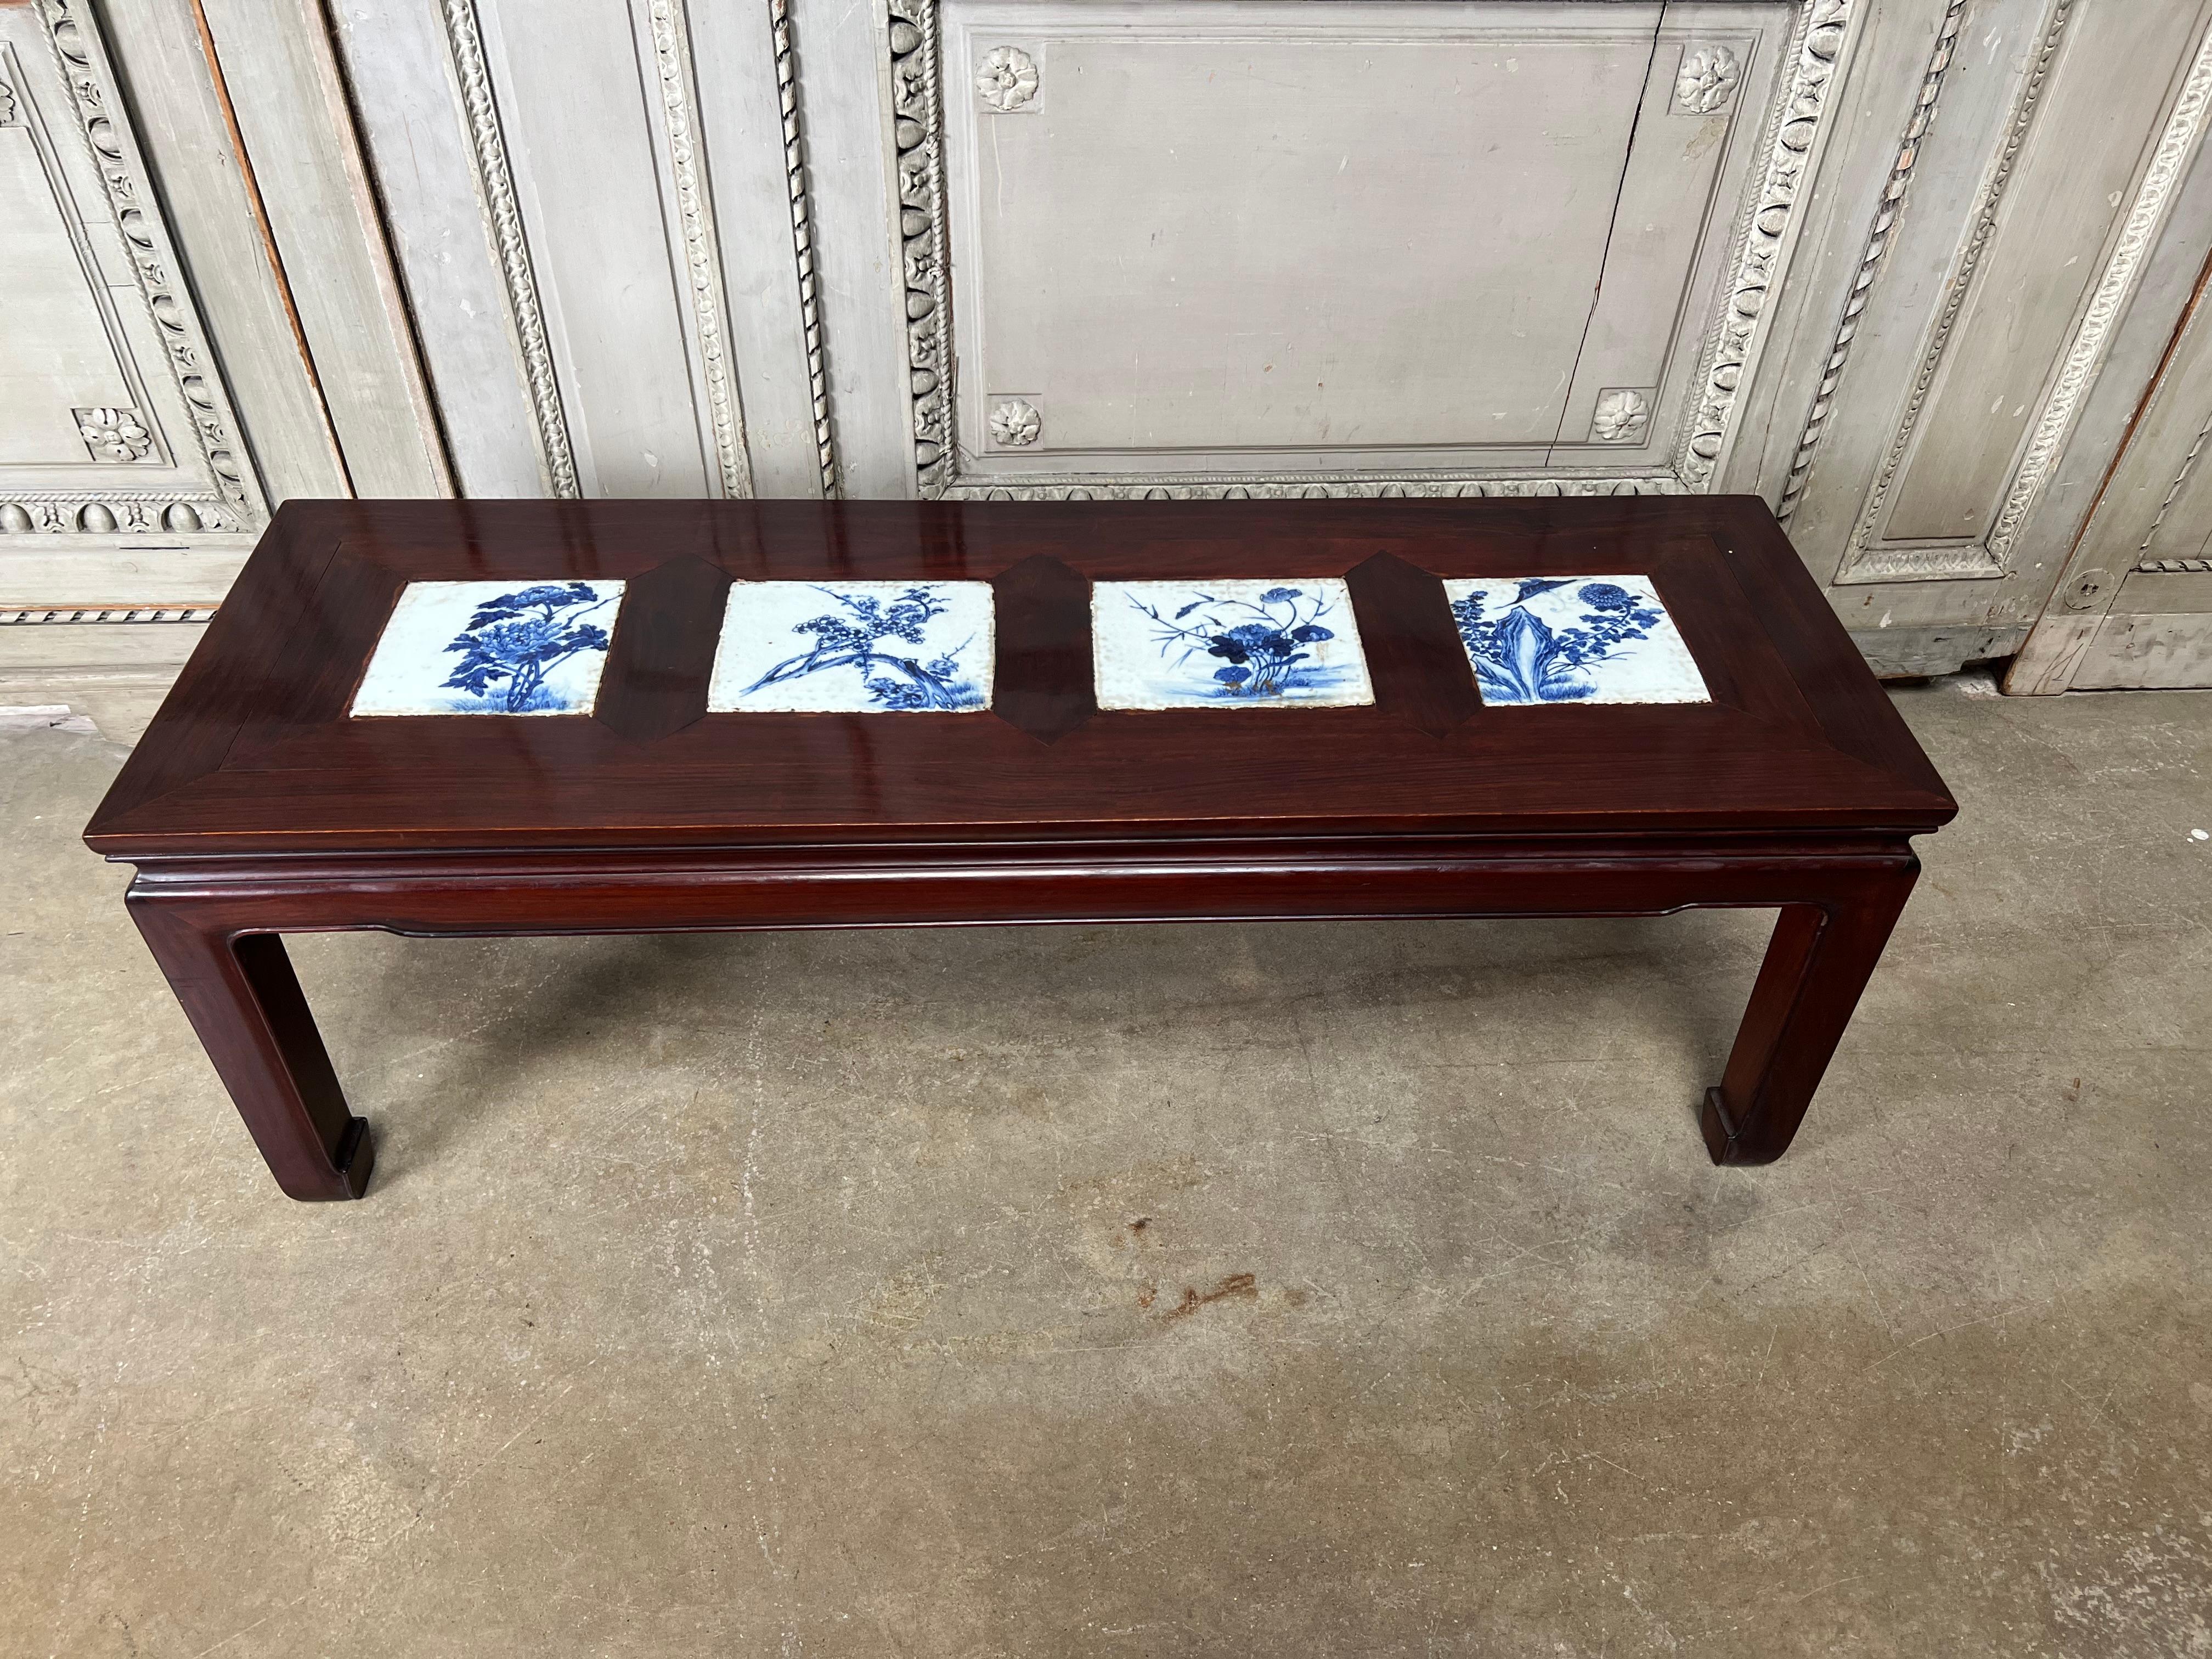 A mid 20th century Chinese rosewood Ming style coffee table with four large 19th century inlayed Chinese blue and white porcelian tiles. This very decorative cocktail table is a great size for a tight space. It would easily work in many different